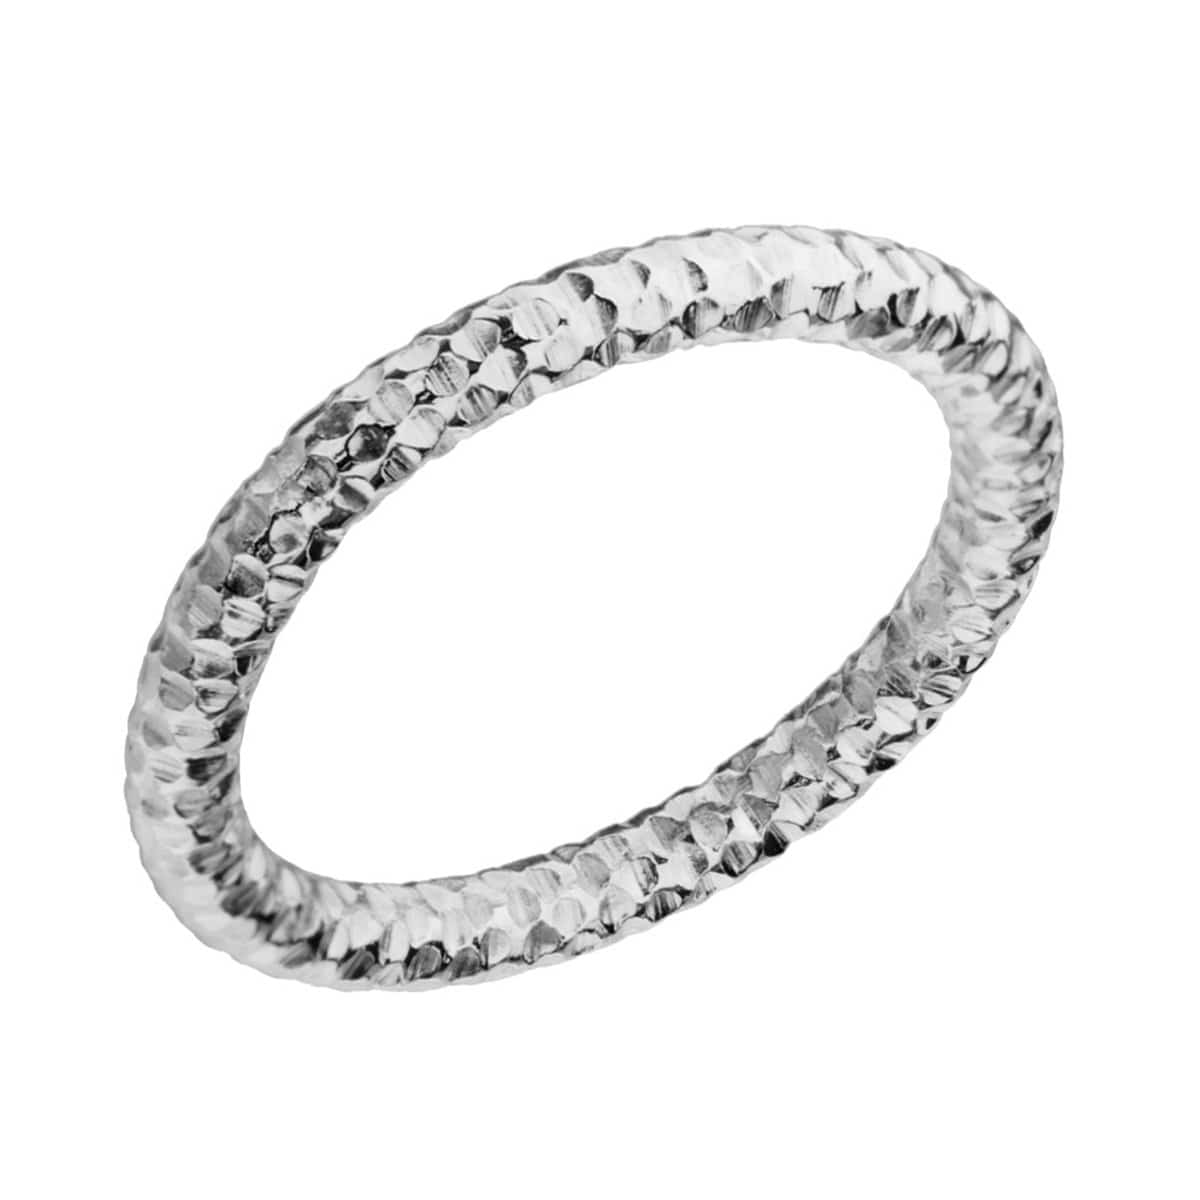 INOX JEWELRY Rings Silver Tone Stainless Steel 2.5mm Hammered Wedding Band